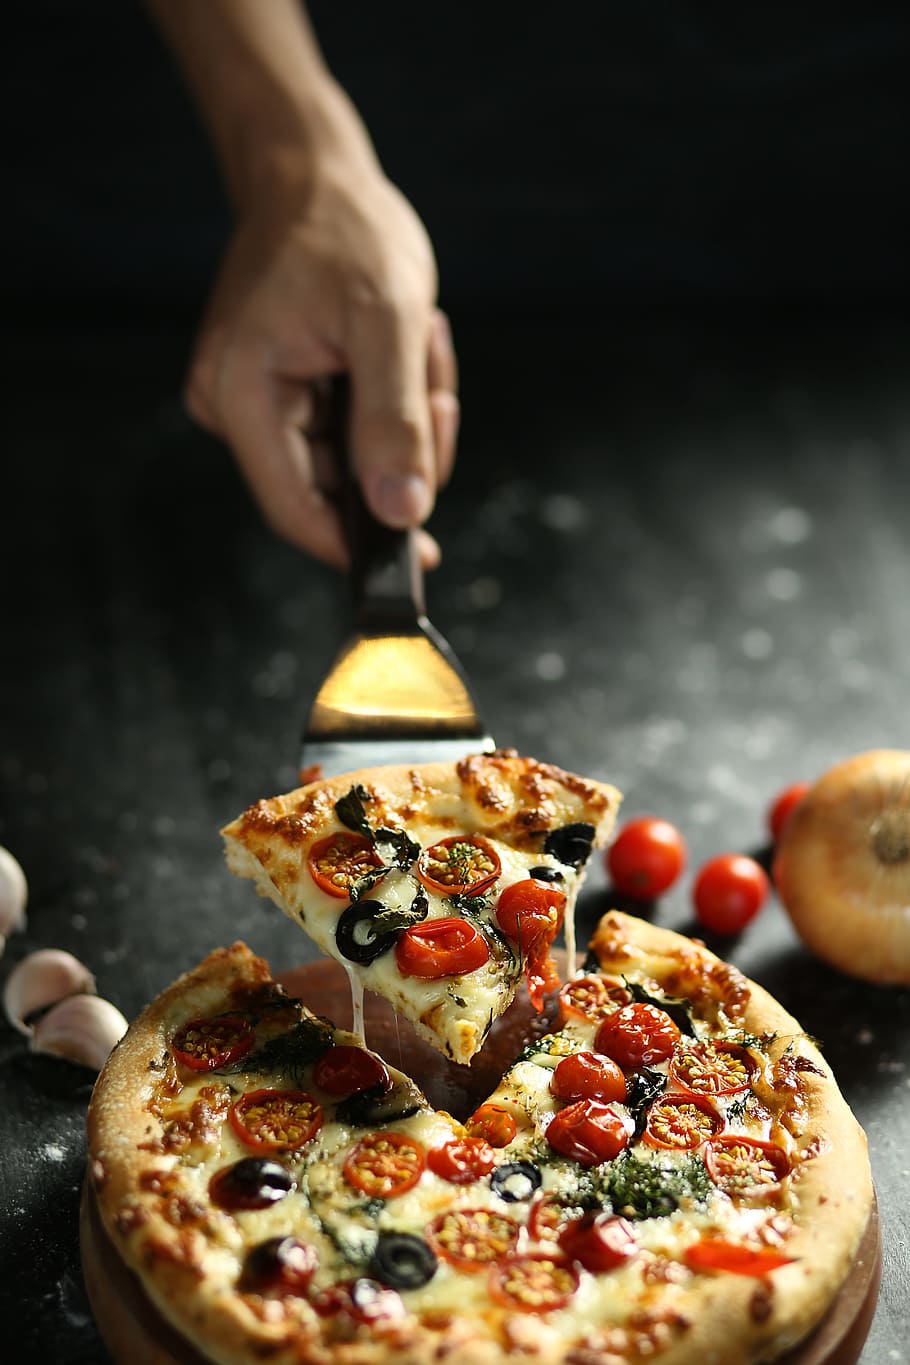 round pepperoni pizza, pizza, pizza hut, cooking, kitchen, pizza dominos, pizza near me, food and drink, food, human hand